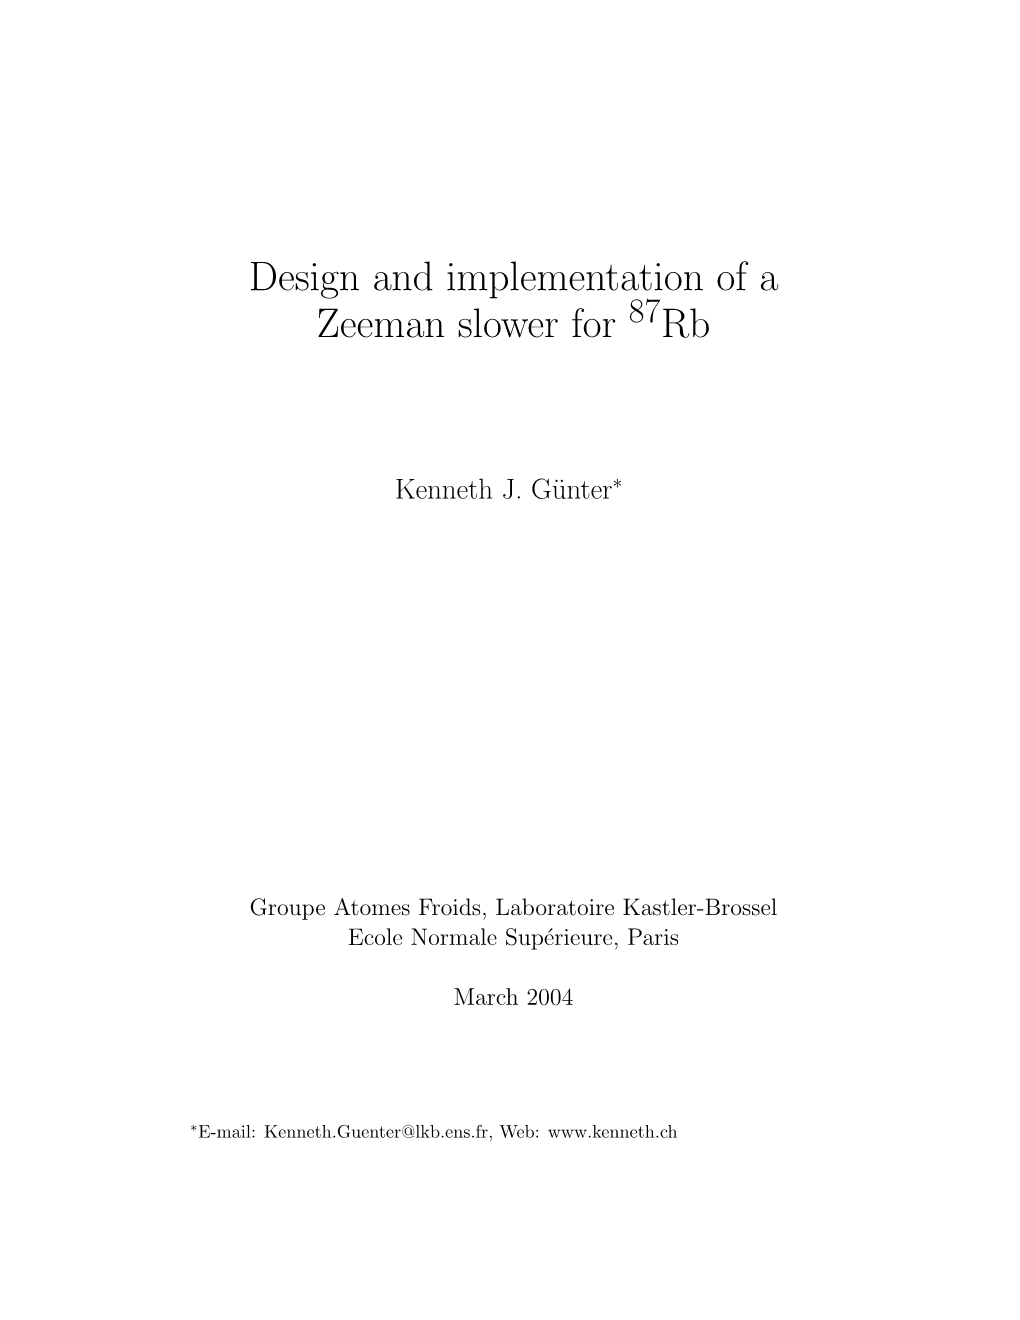 Design and Implementation of a Zeeman Slower for Rb